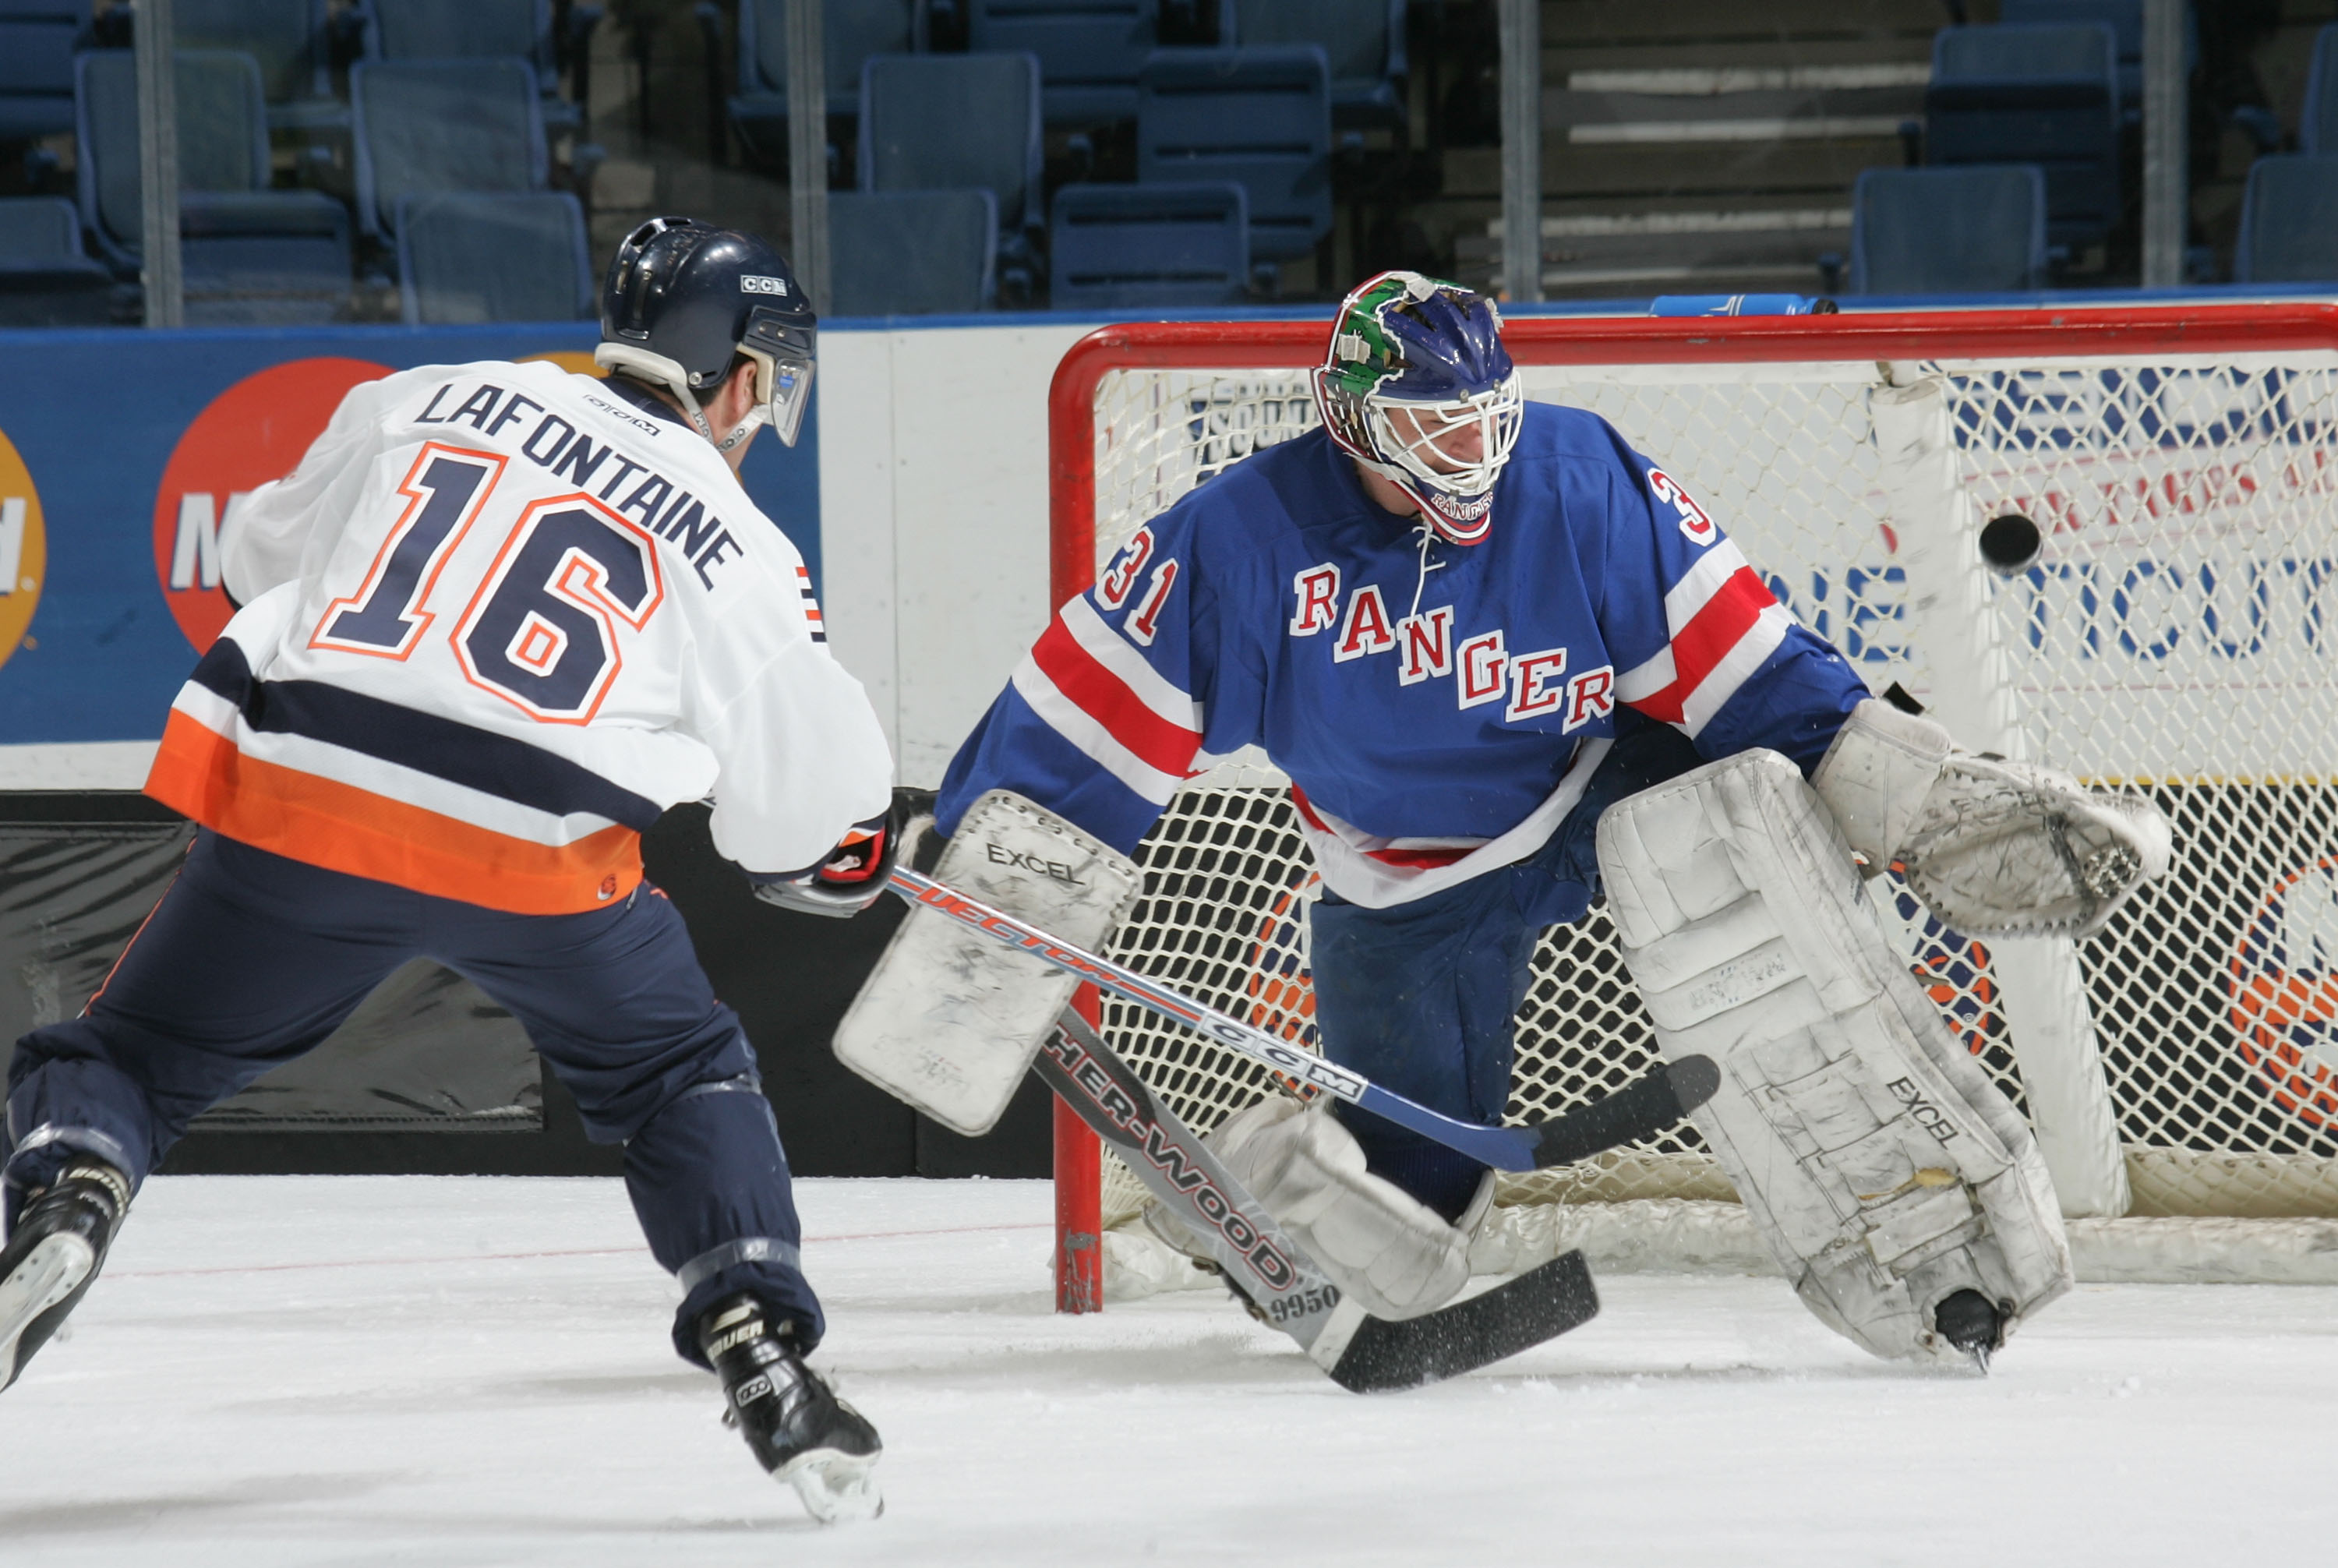 UNIONDALE, NY - APRIL 16:  Pat Lafontaine #16 of the New York Islanders Alumni scores on Mark Laforest #31 of the New York Ranger Alumni team during the Hockey for Heroes 3 on 3 Hockey Tournament on April 16, 2005 at Nassau Coliseum in Uniondale, New York